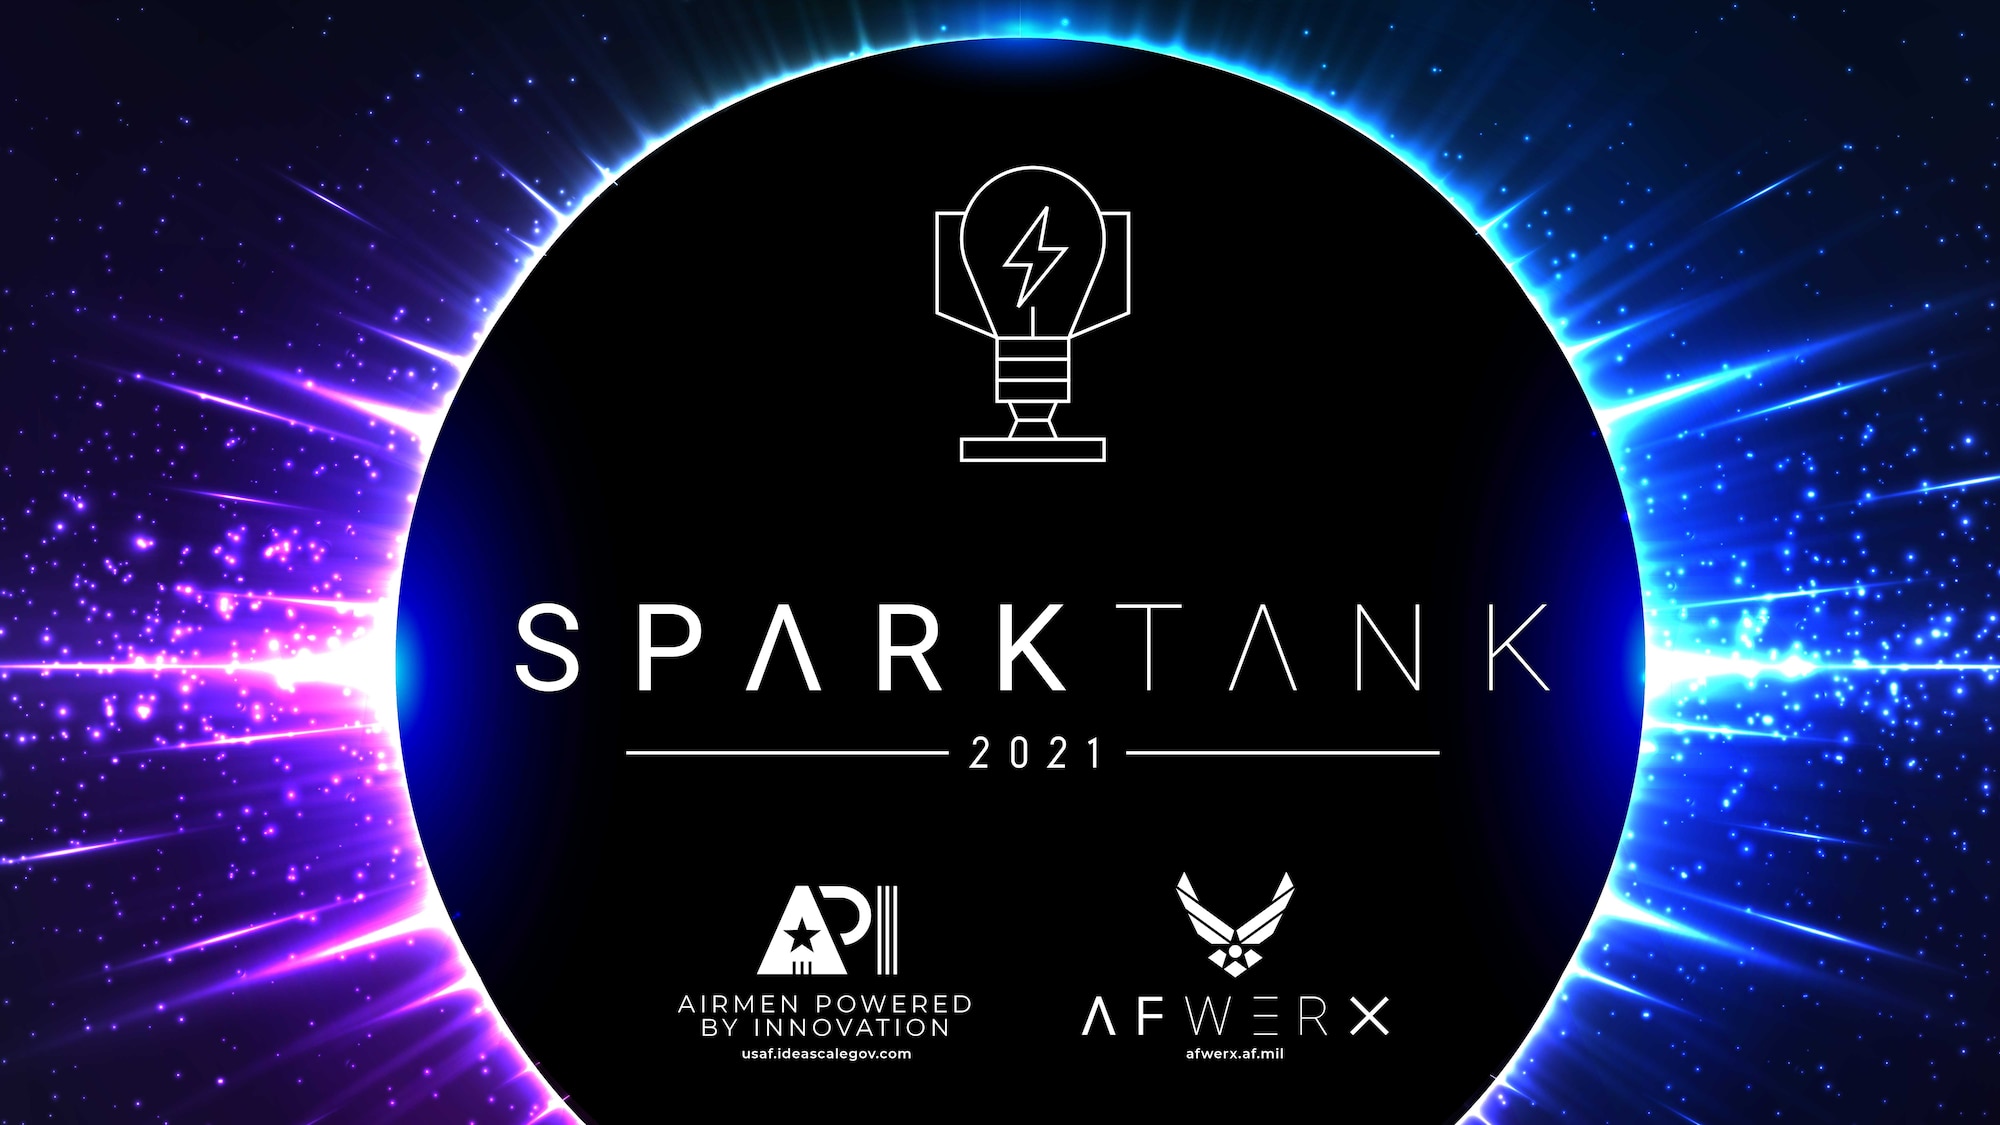 Spark Tank offers the opportunity to get their ideas in front of key enabling agencies that can share expertise and resources such as funding or personnel for the projects being presented and demonstrate pathways for intrepreneurs to make their initiatives successful.